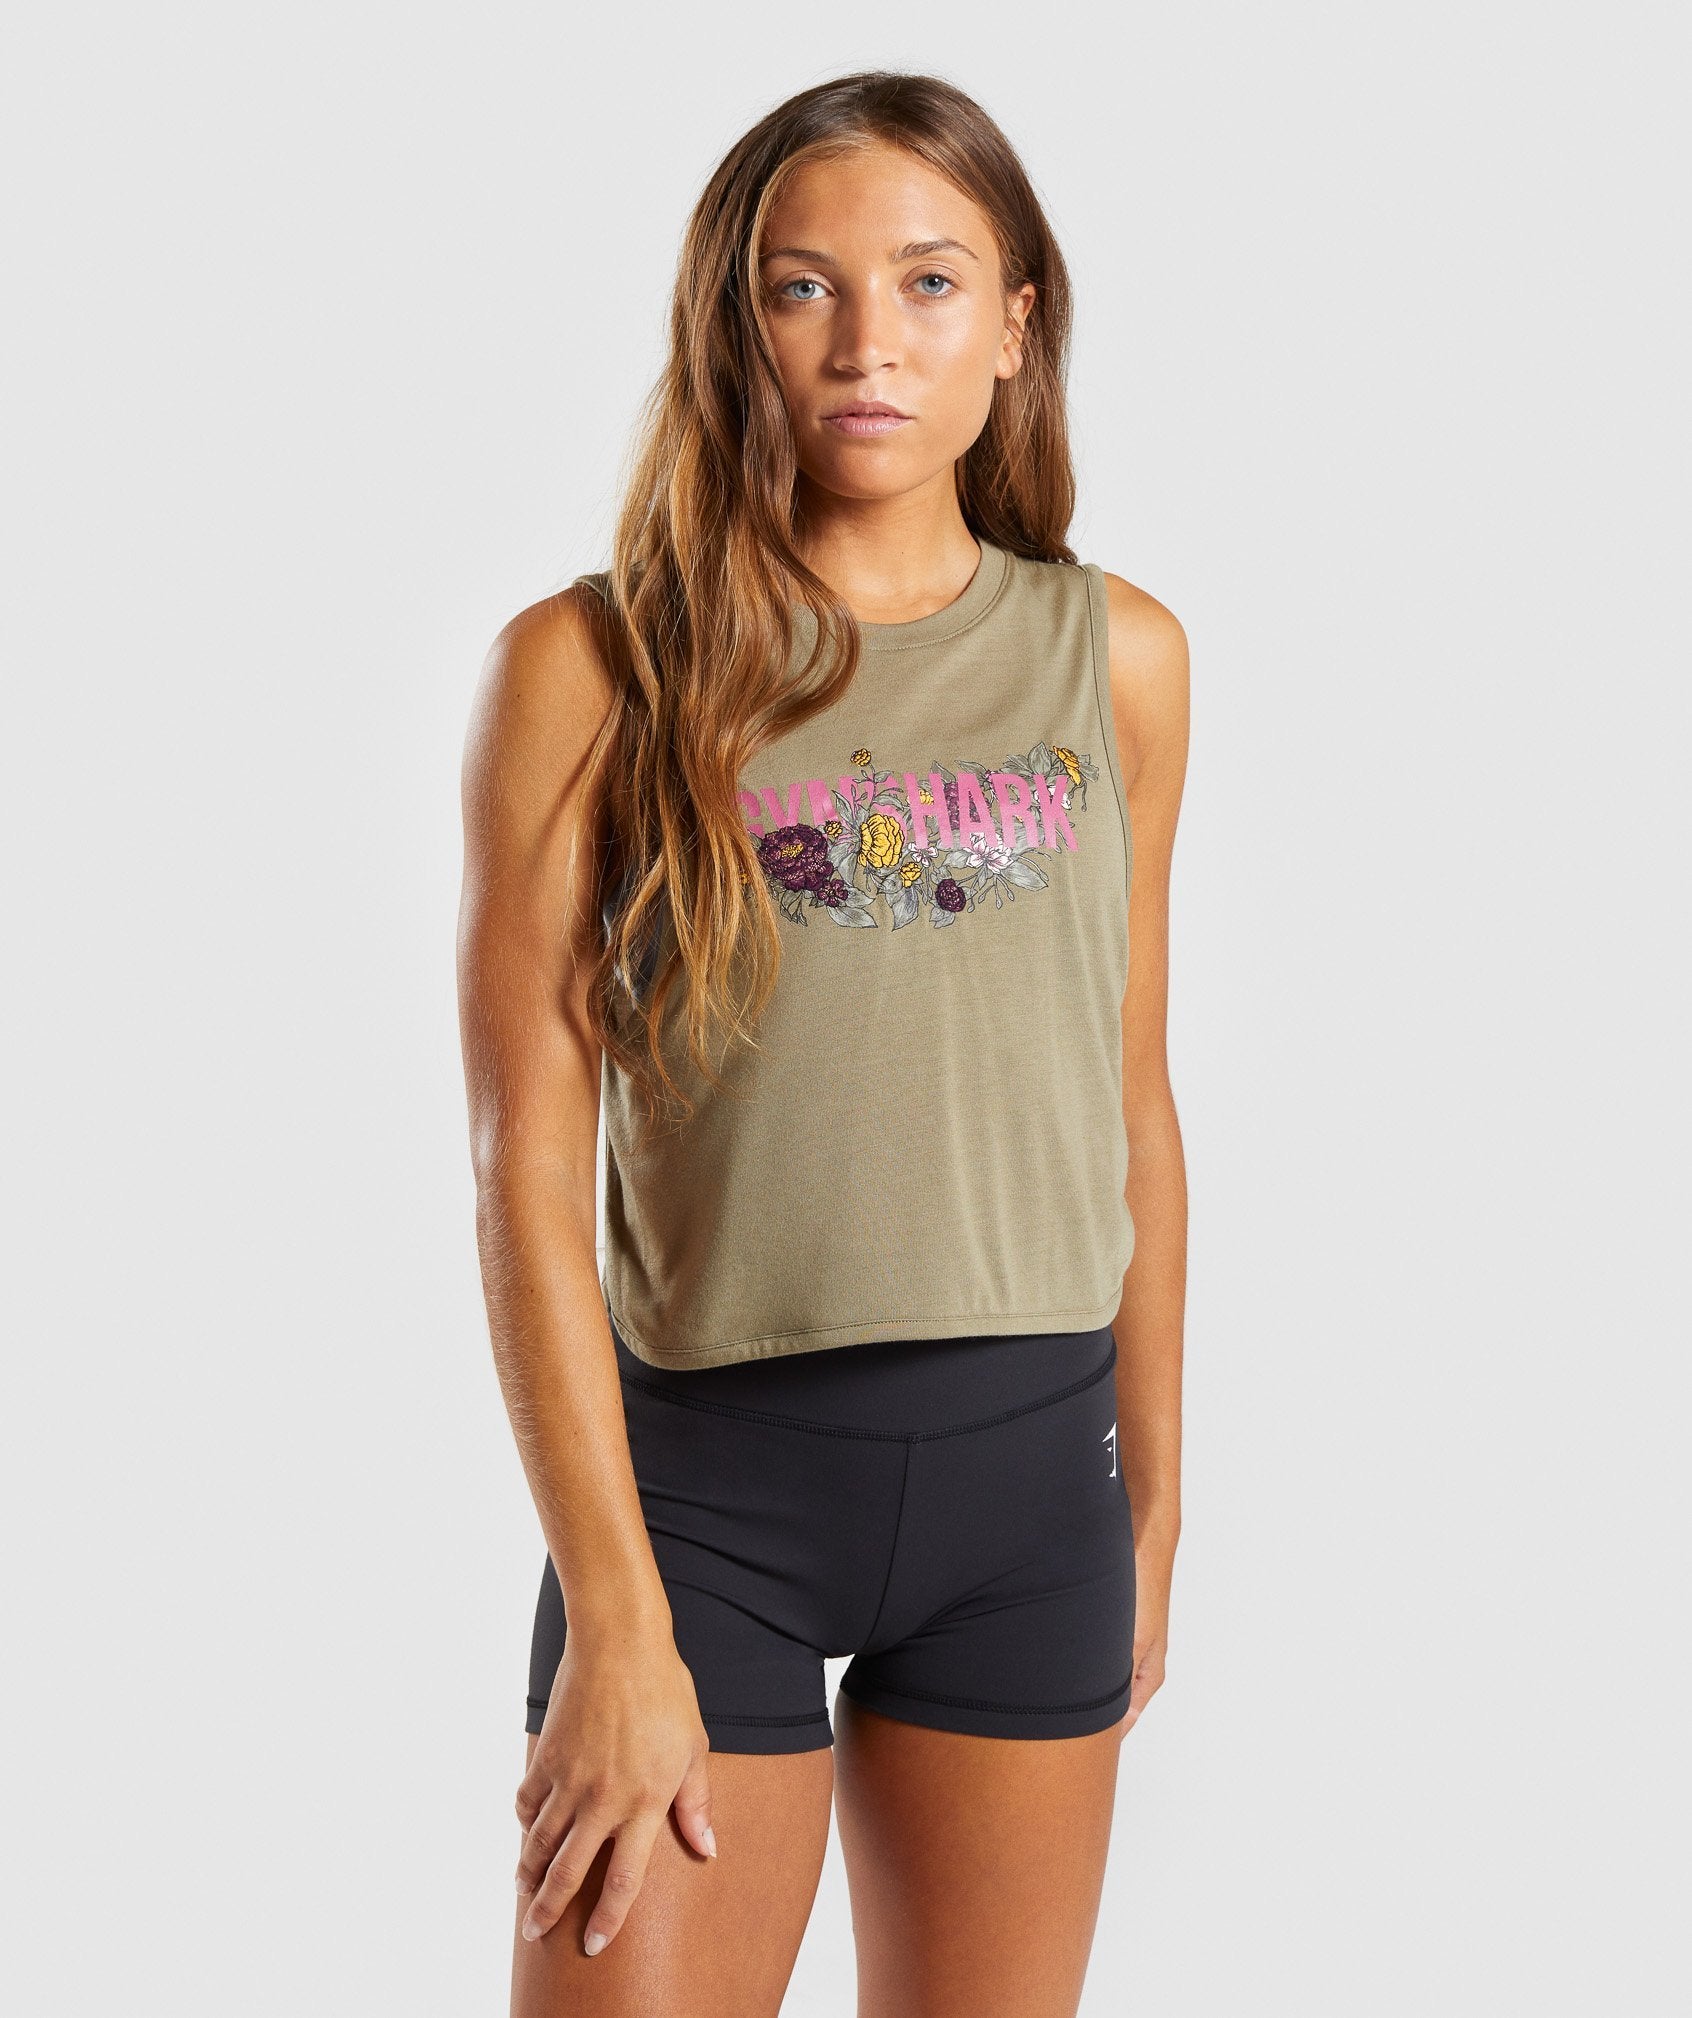 Floral Graphic Tank in Khaki - view 1